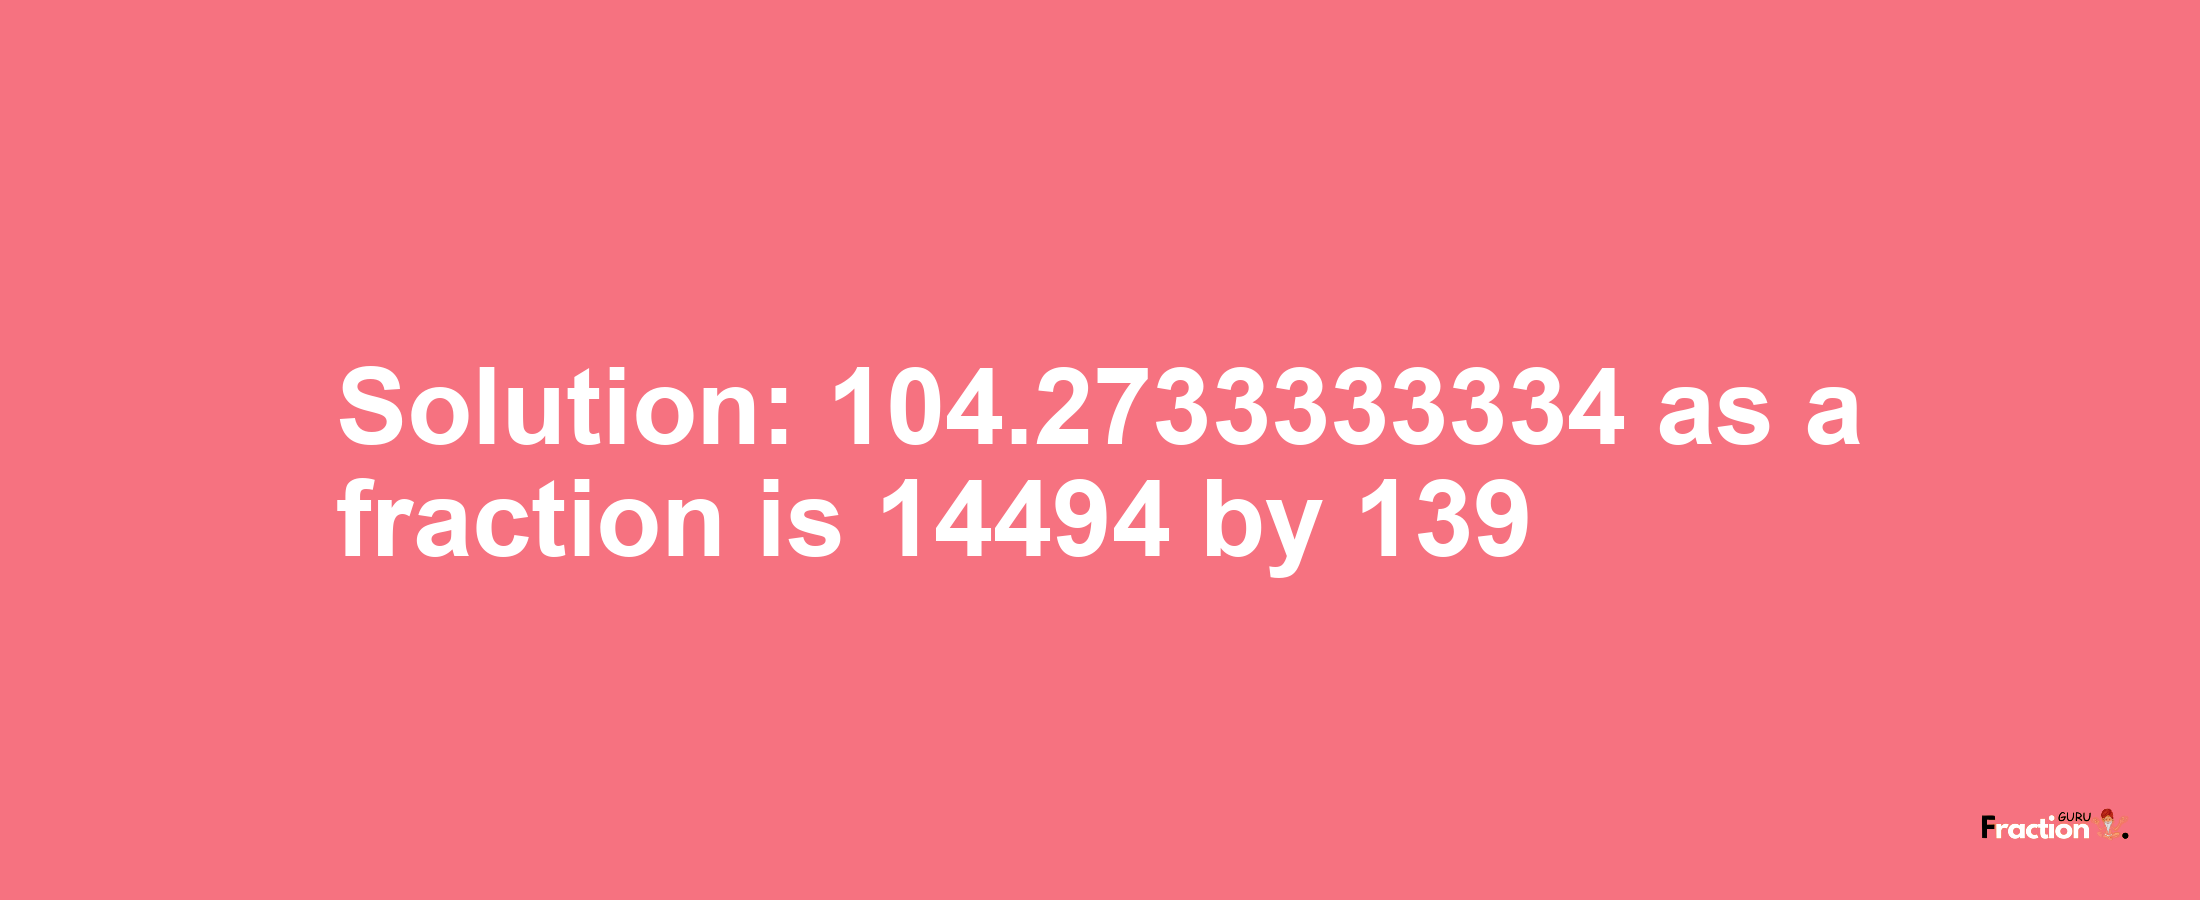 Solution:104.2733333334 as a fraction is 14494/139